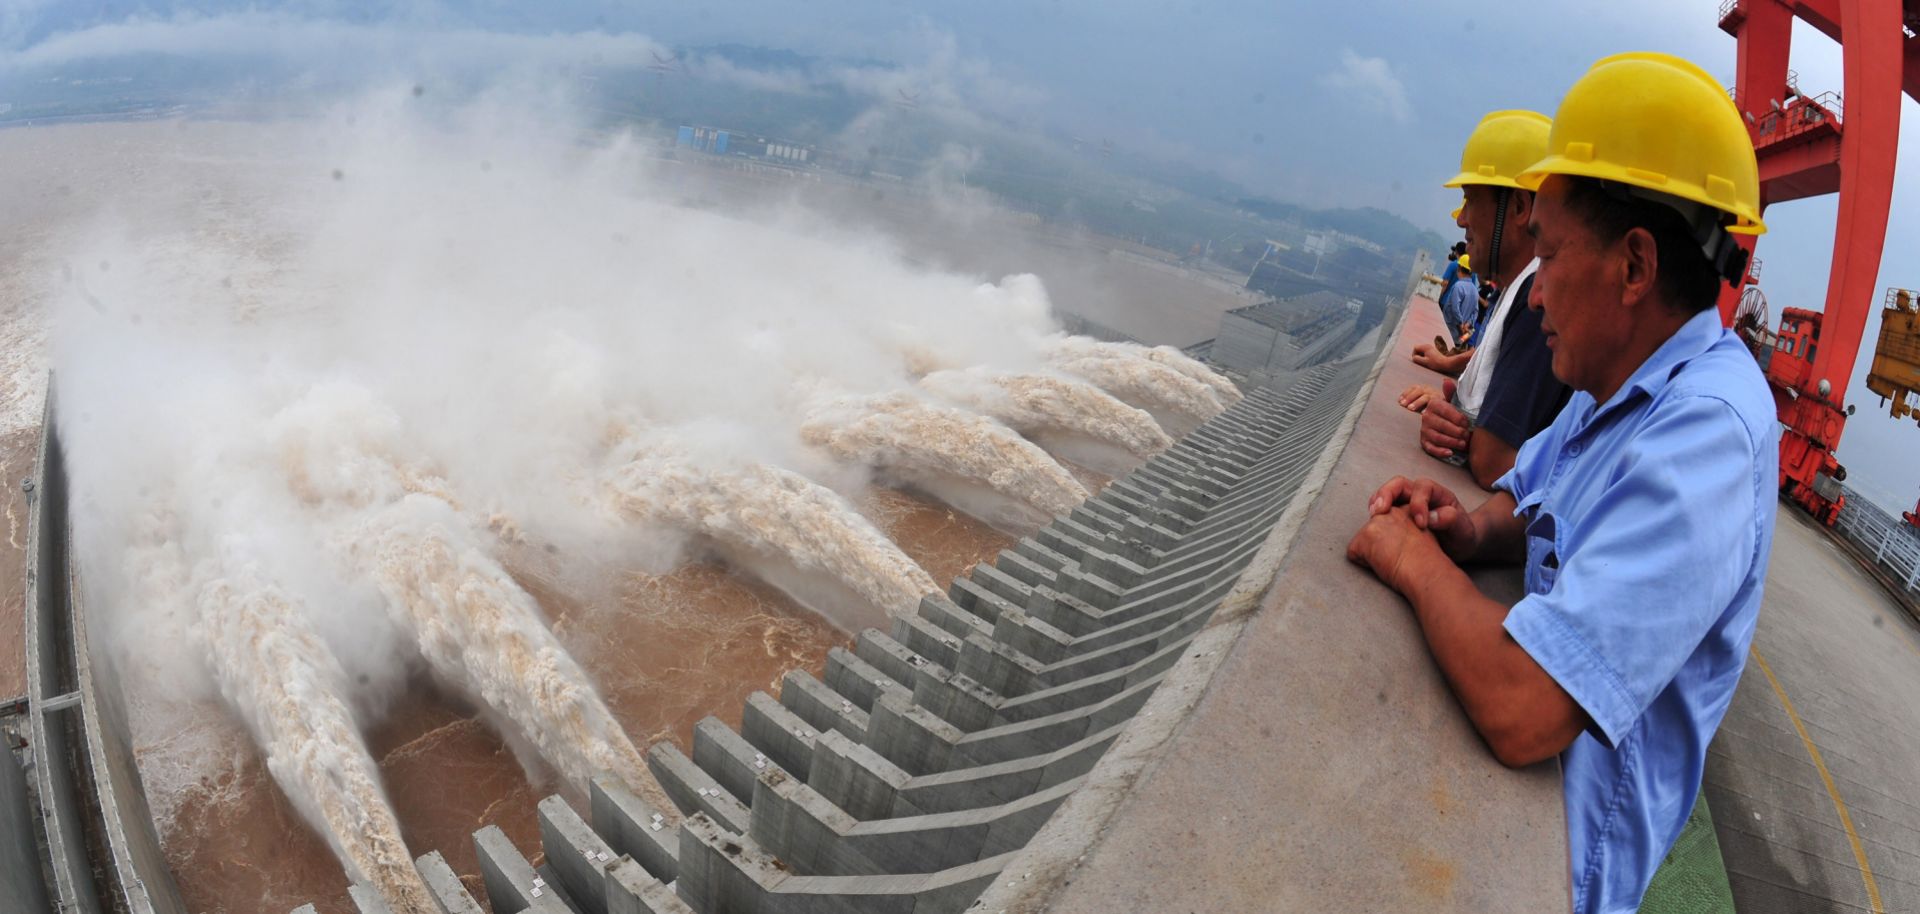 Workers watch in 2012 as water is released from the Three Gorges Dam, a gigantic hydropower project on the Yangtze River in central China.